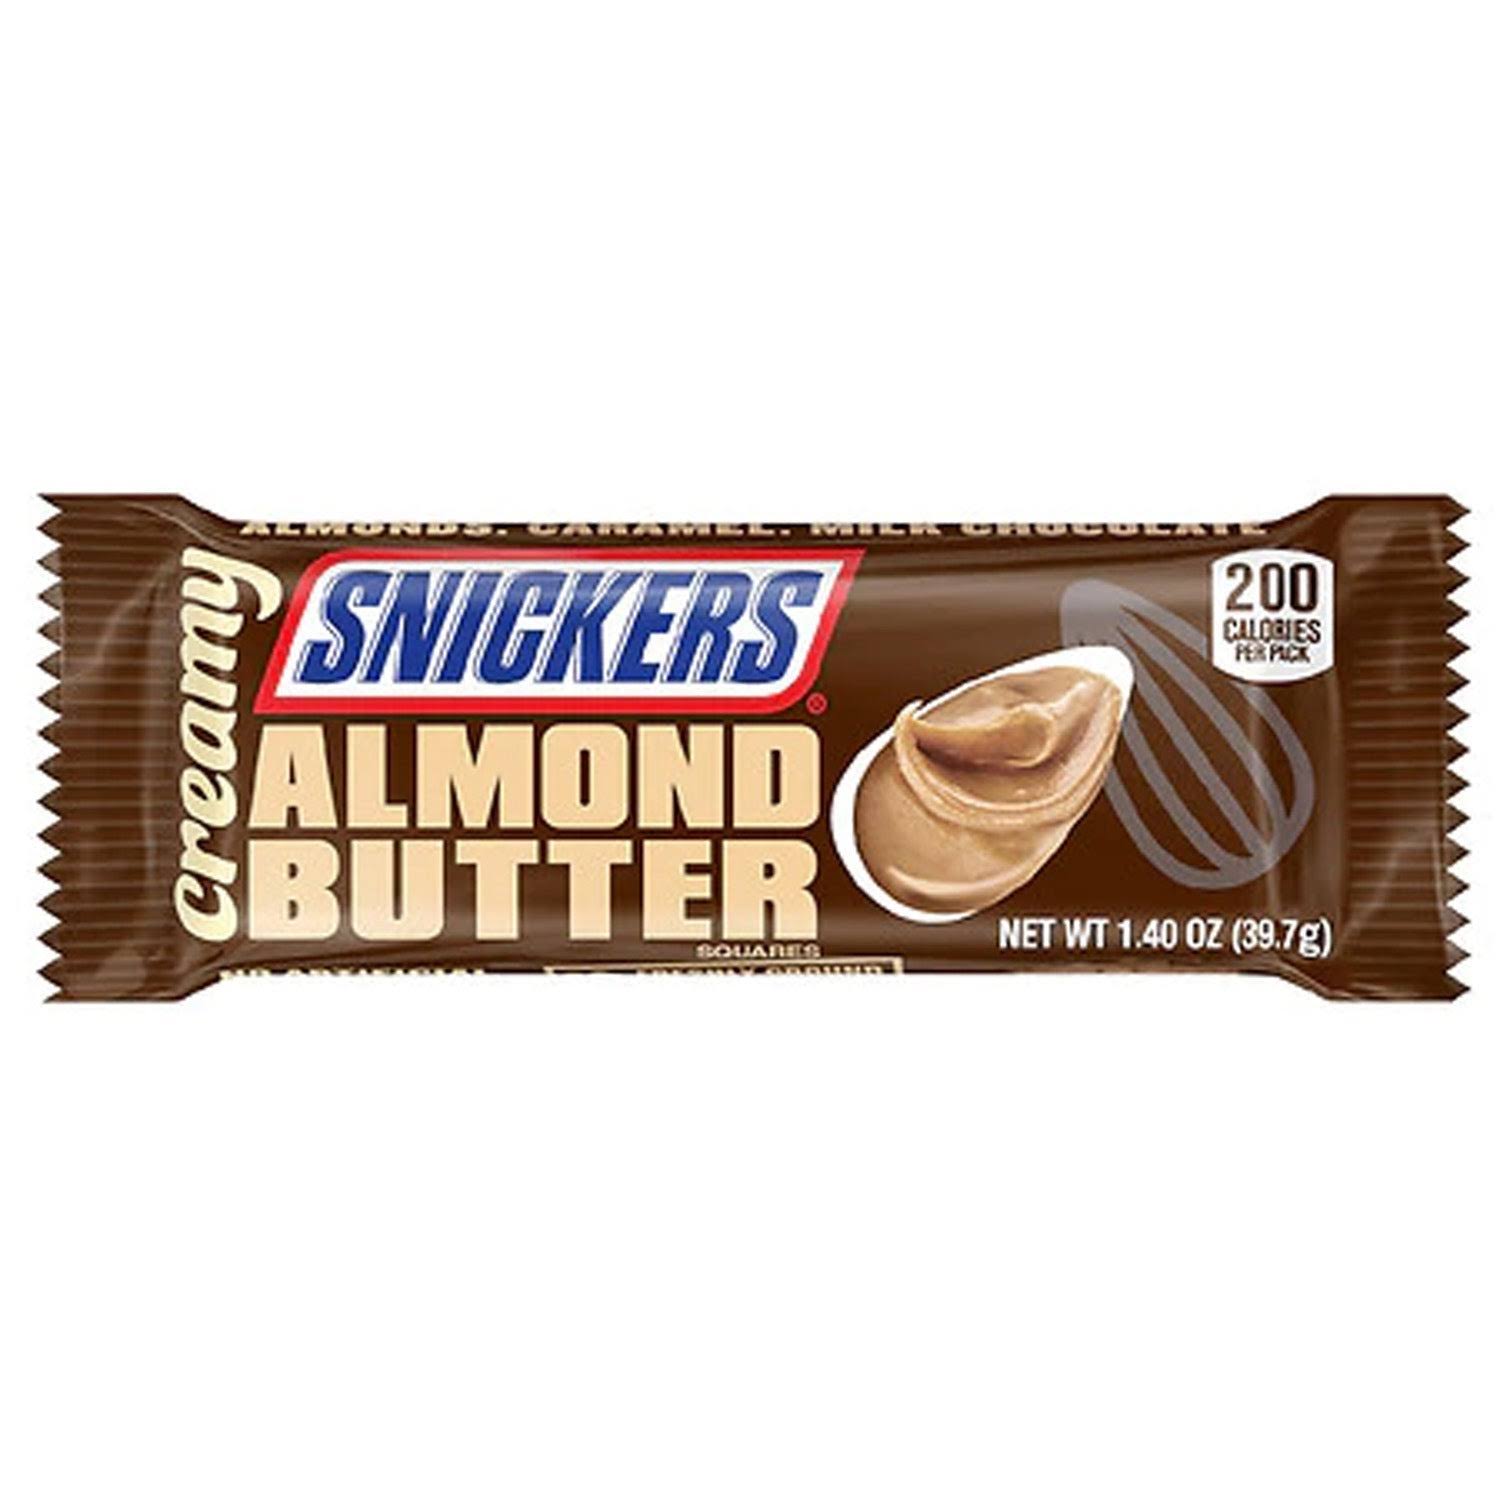 Snickers Creamy almond Butter 39g